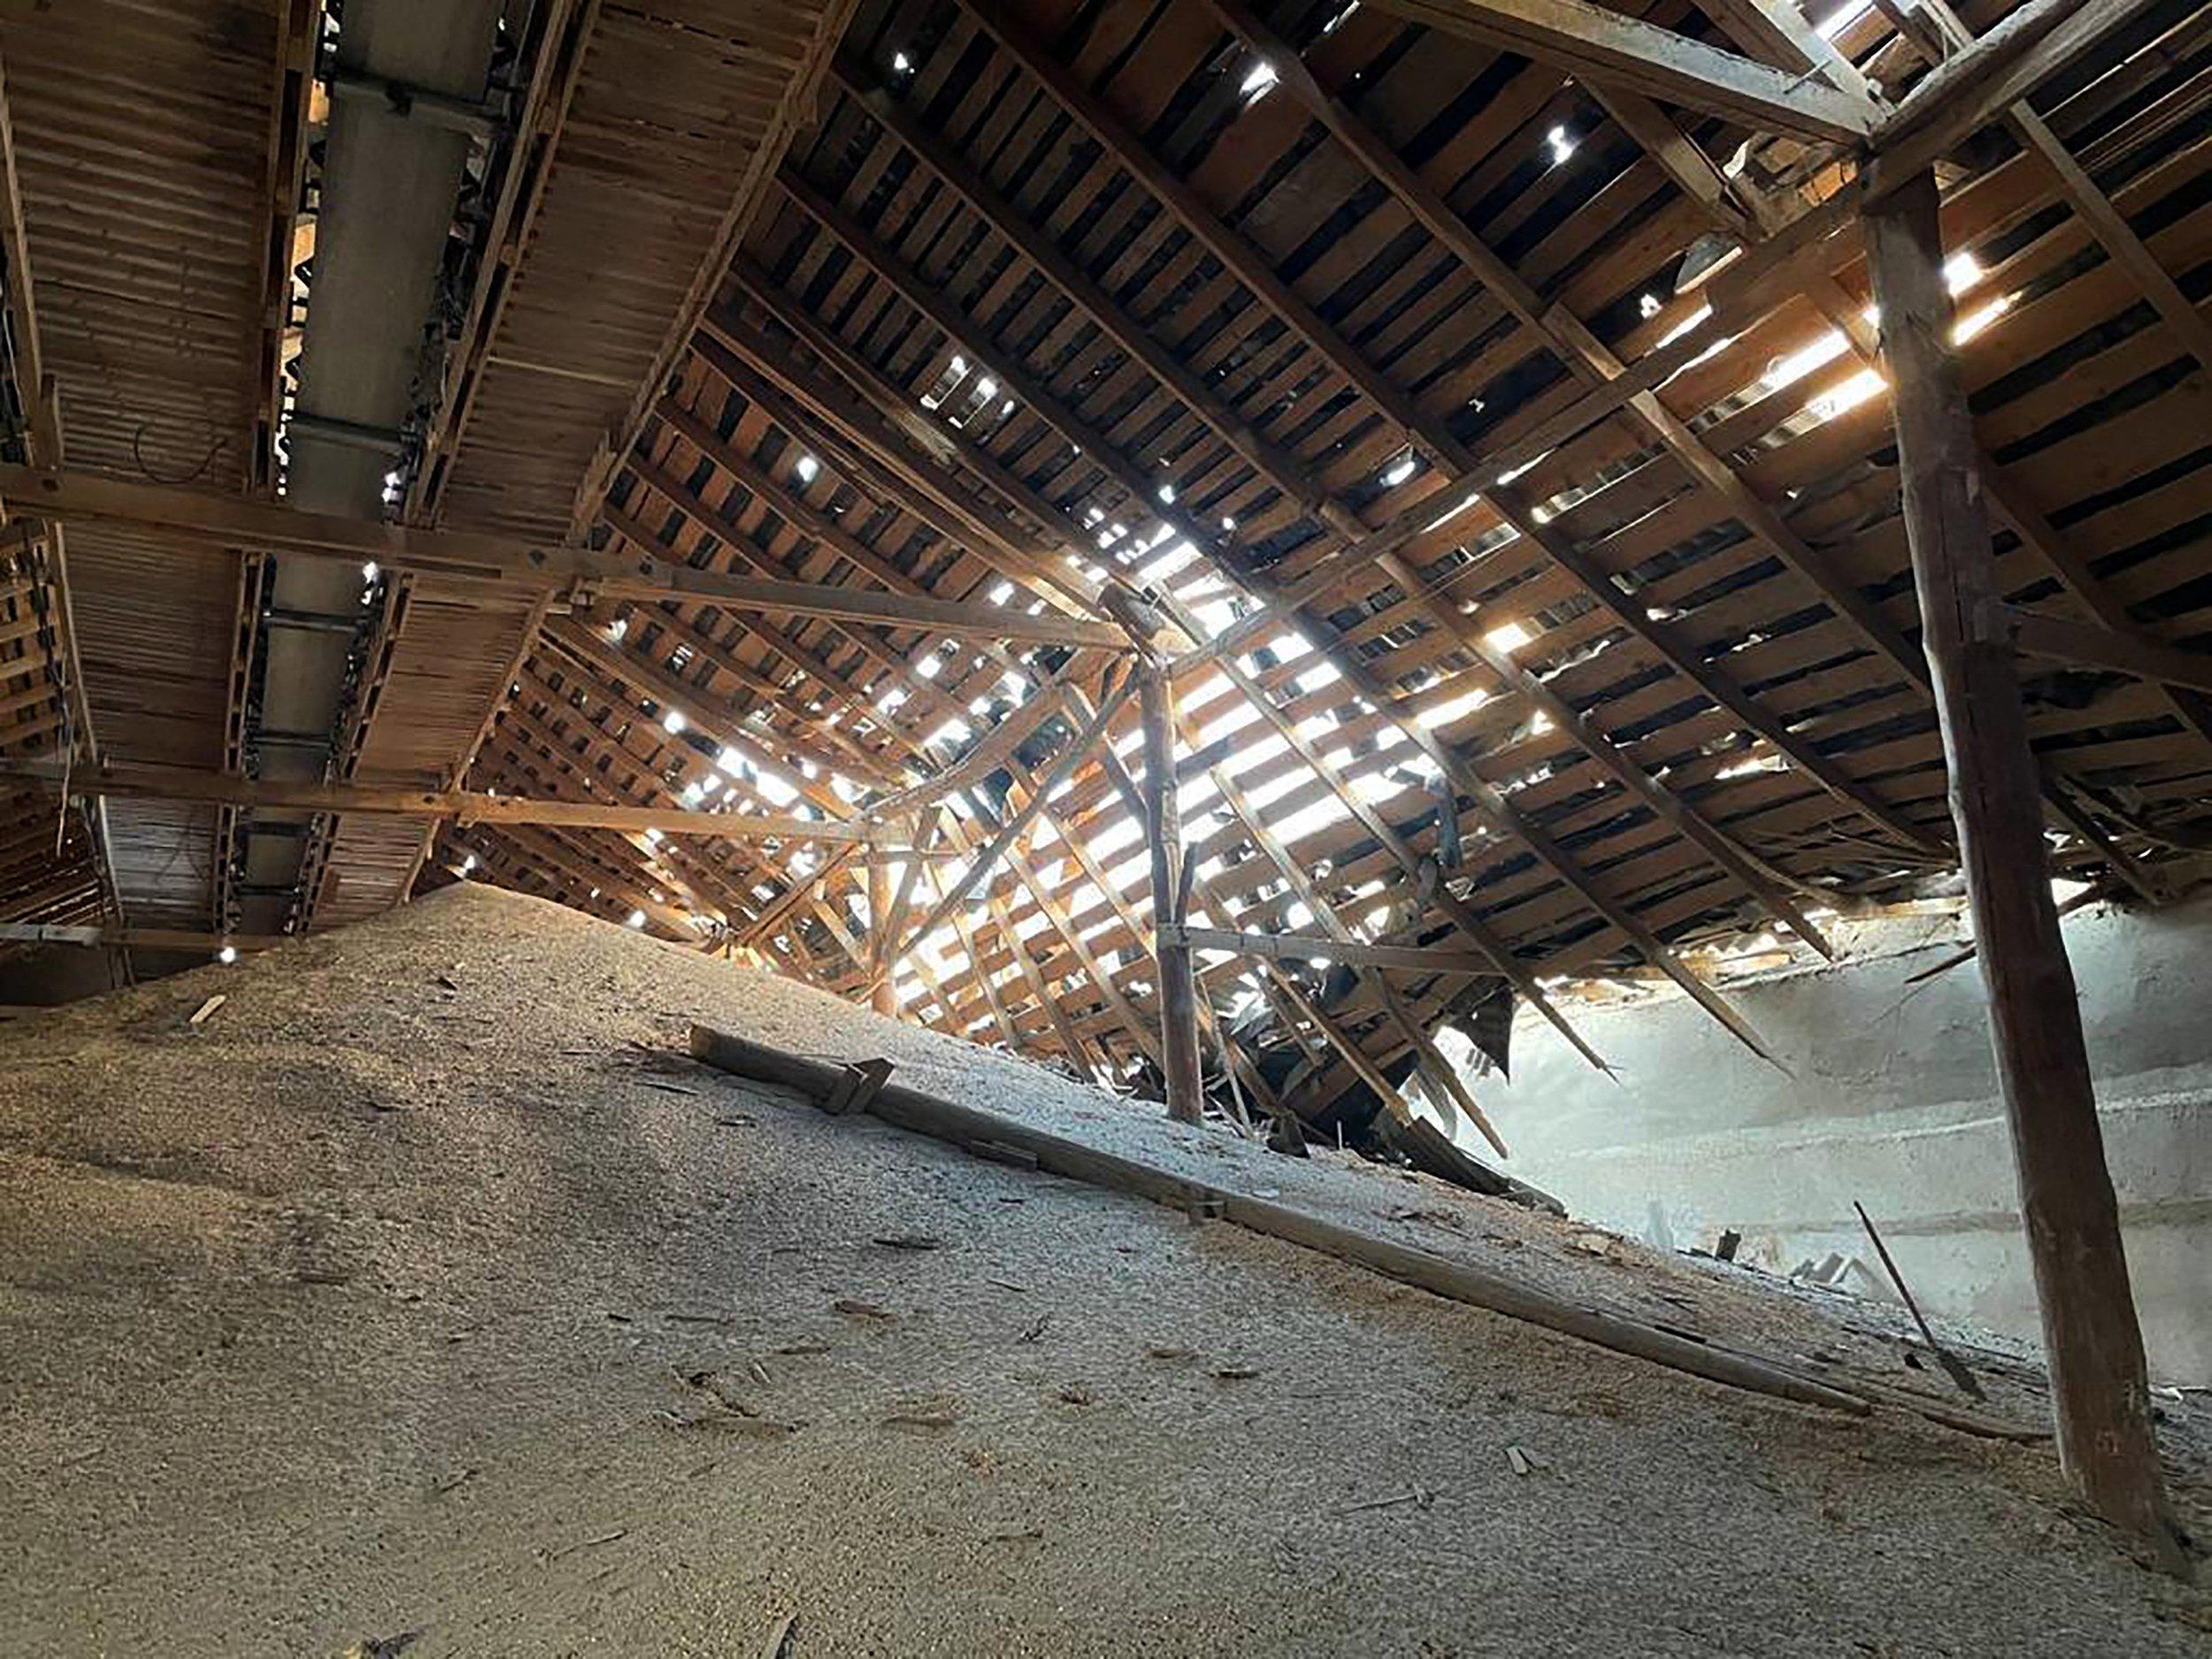 This handout photograph taken and released on September 13, 2023 by the press center of the Defense Forces of Southern Ukraine shows a damaged grain warehouse following Russian drone attacks in Odesa region, amid Russia's military invasion on Ukraine. - Russian drones struck the Danube river port of Izmail in southern Ukraine on September 13, the region's governor said, as Moscow continued to pound Kyiv's vital export routes. The Ukrainian military claimed 32 drones were downed during the attack, which the governor said injured several people and caused a fire. (Photo by Handout / press center of Defense Forces of the Southern Ukraine / AFP) / RESTRICTED TO EDITORIAL USE - MANDATORY CREDIT "AFP PHOTO / PRESS CENTER OF DEFENSE FORCES OF SOUTHERN UKRAINE" - NO MARKETING NO ADVERTISING CAMPAIGNS - DISTRIBUTED AS A SERVICE TO CLIENTS - RESTRICTED TO EDITORIAL USE - MANDATORY CREDIT "AFP PHOTO / Press Center of Defense Forces of Southern Ukraine" - NO MARKETING NO ADVERTISING CAMPAIGNS - DISTRIBUTED AS A SERVICE TO CLIENTS /